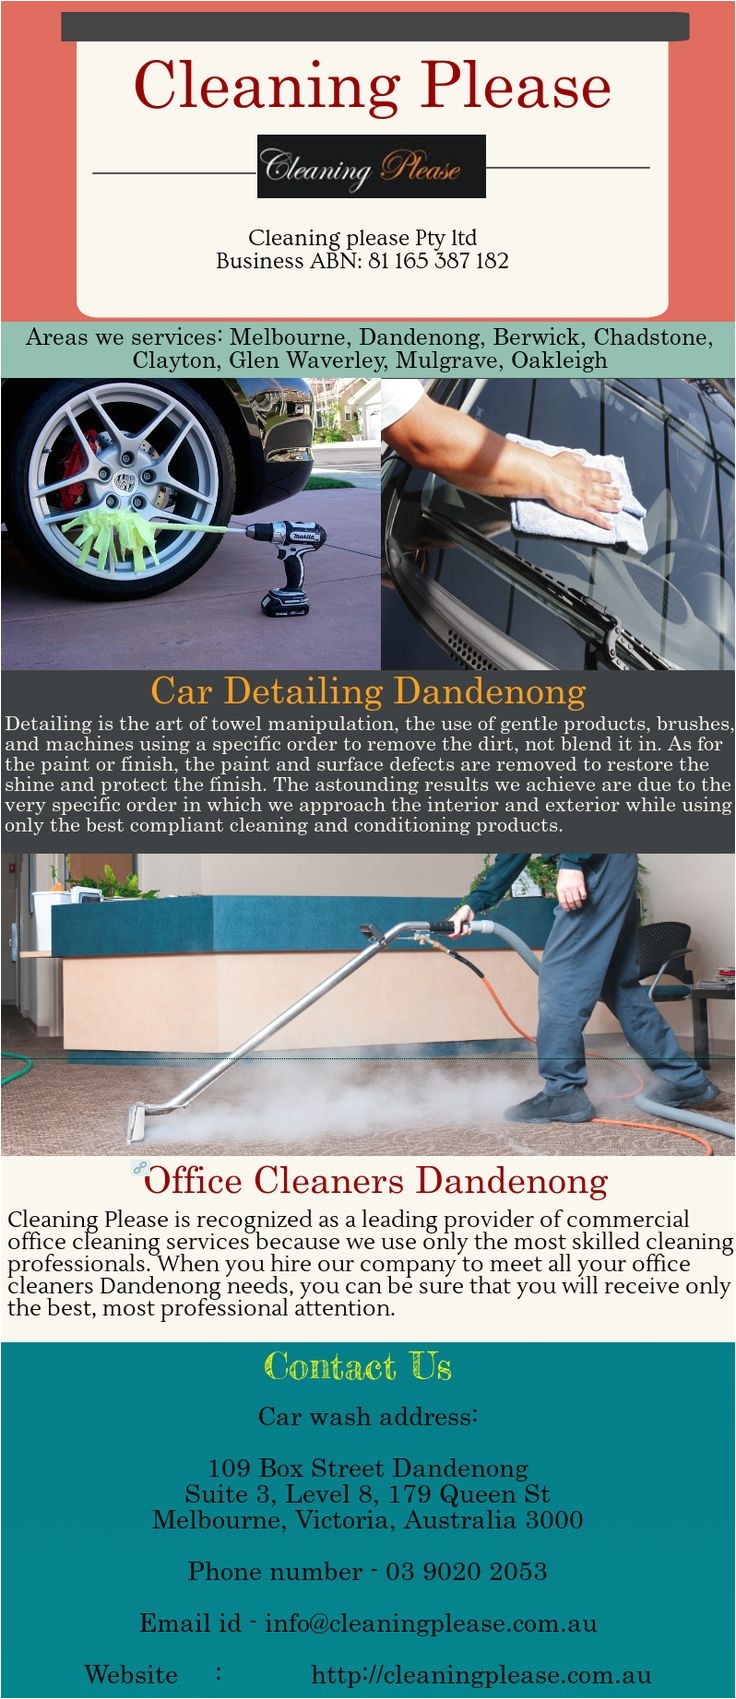 we provide professional commercial officecleanersdandenong services by using innovative advanced and high quality cleaning